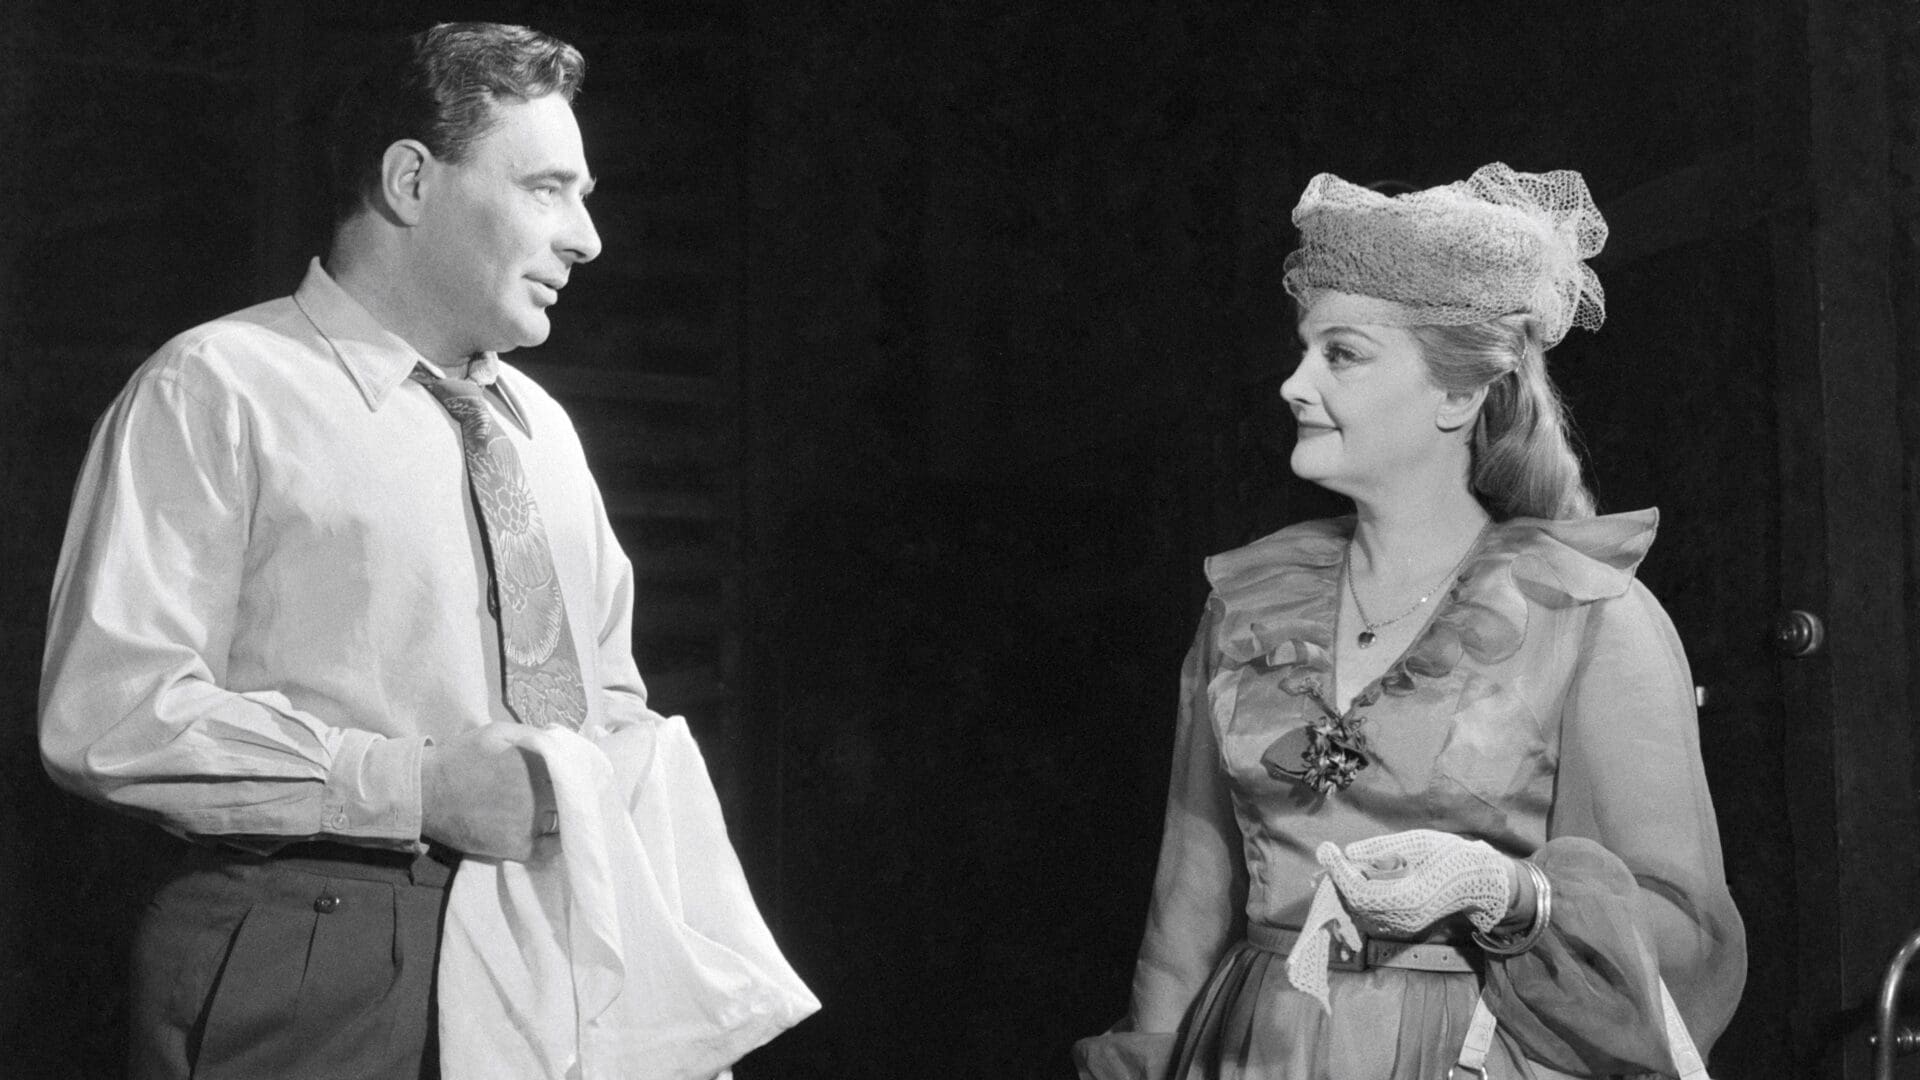 Tibor Bodor as Mitch and Klári Tolnay as Blanche in a scene of Tennessee Williams’ A Streetcar Named Desire in 1962 at the Madách Theatre in Budapest.